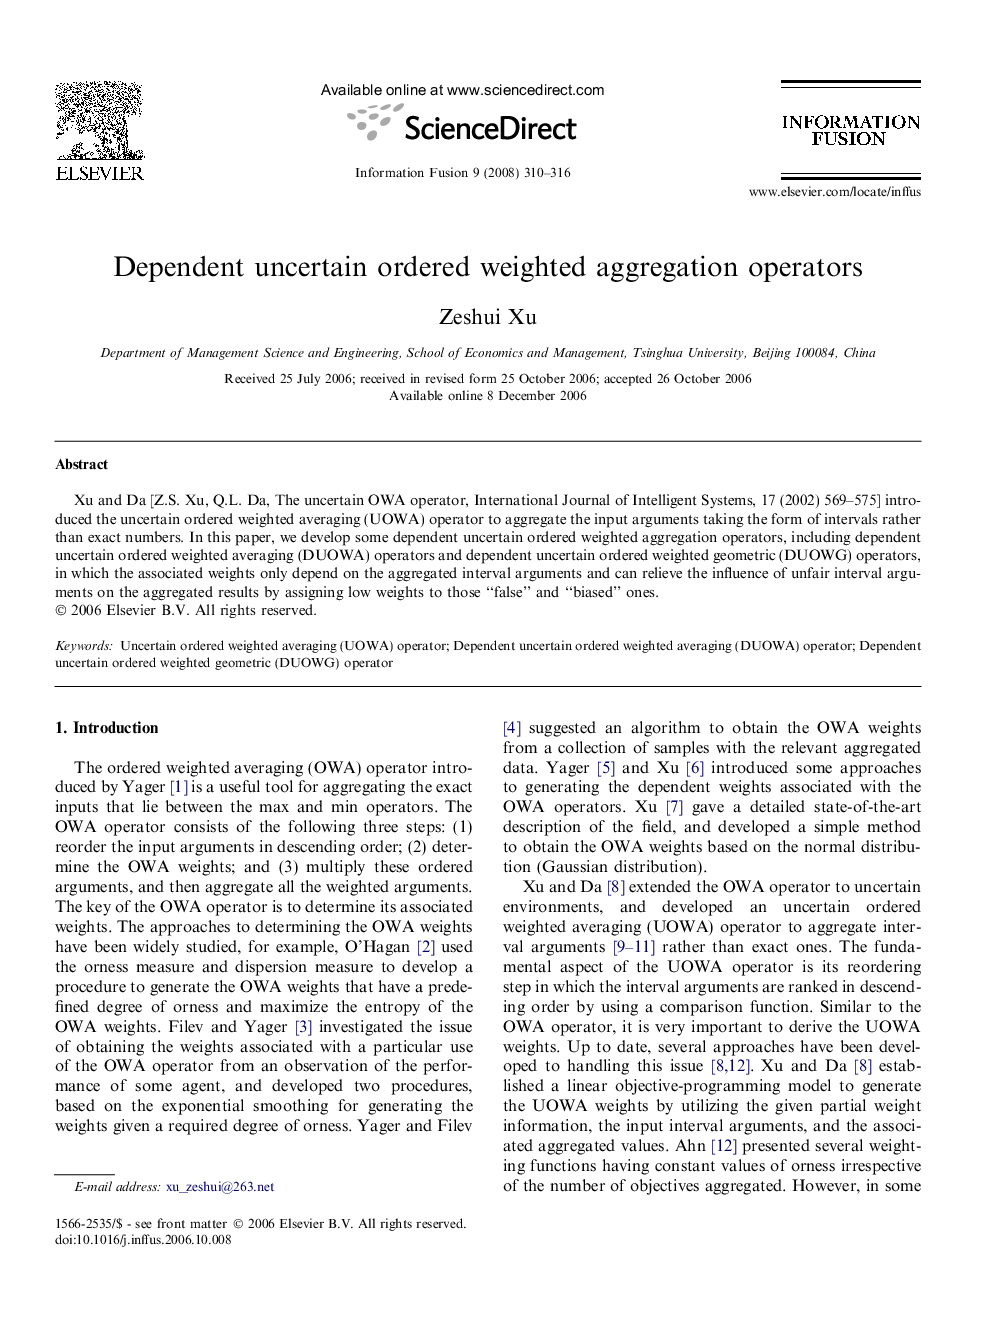 Dependent uncertain ordered weighted aggregation operators